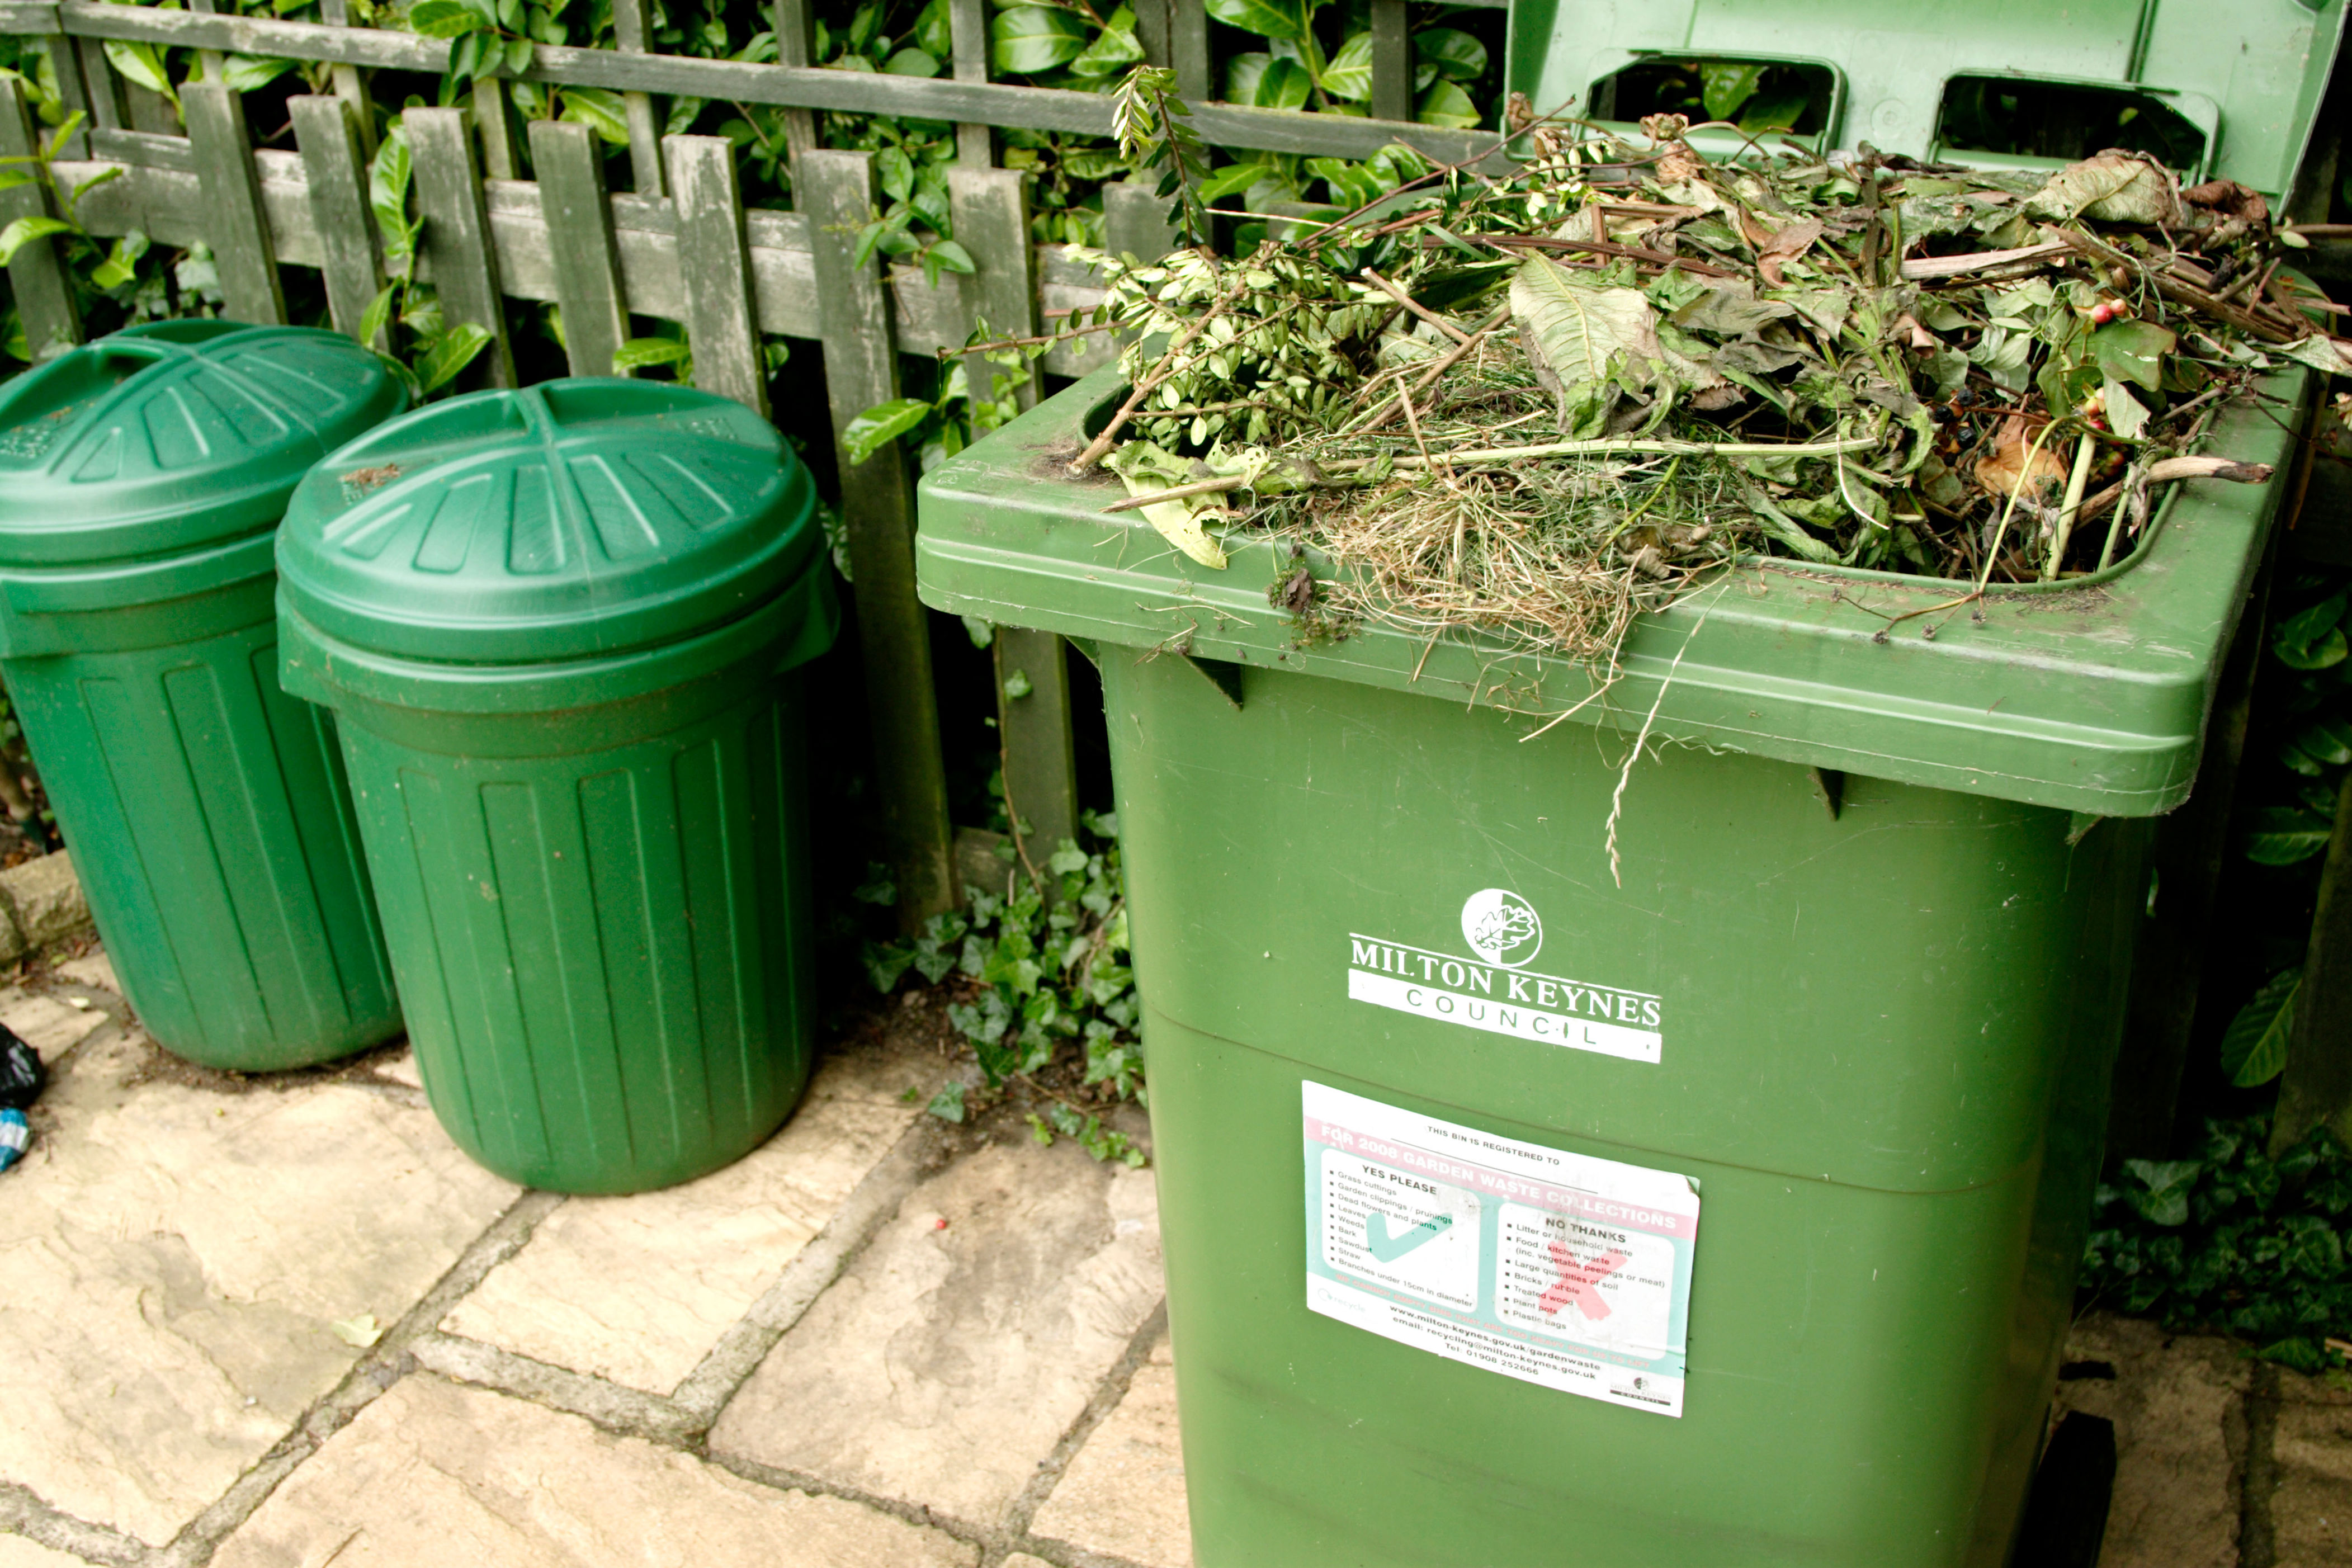 rhs: ‘chop and drop’ plant clippings to save time and money on compost